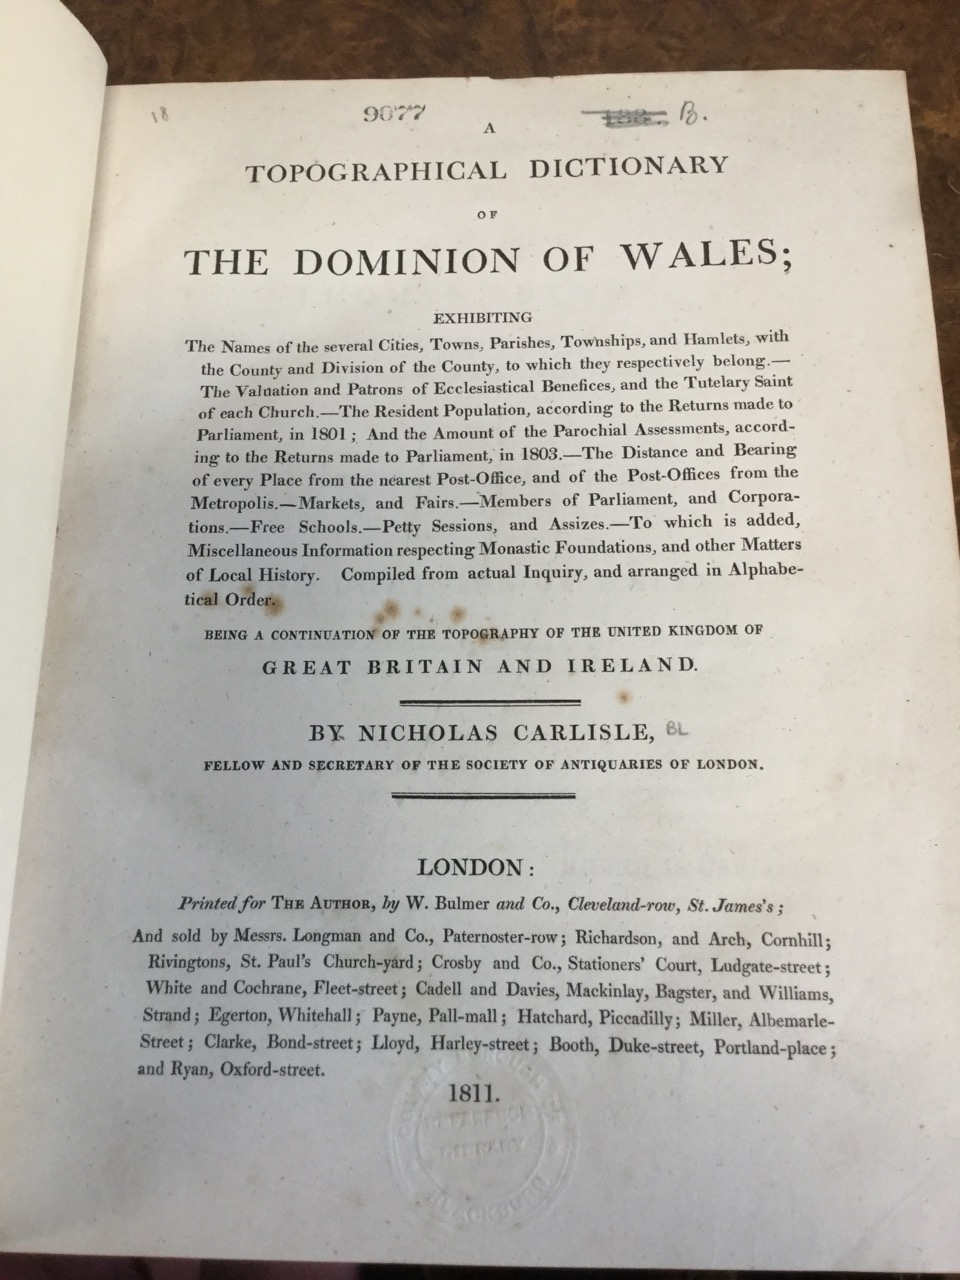 The Topographical Dictionary of the Dominion of Wales by Nicholas Carlisle, published in 1811, a - Image 2 of 3